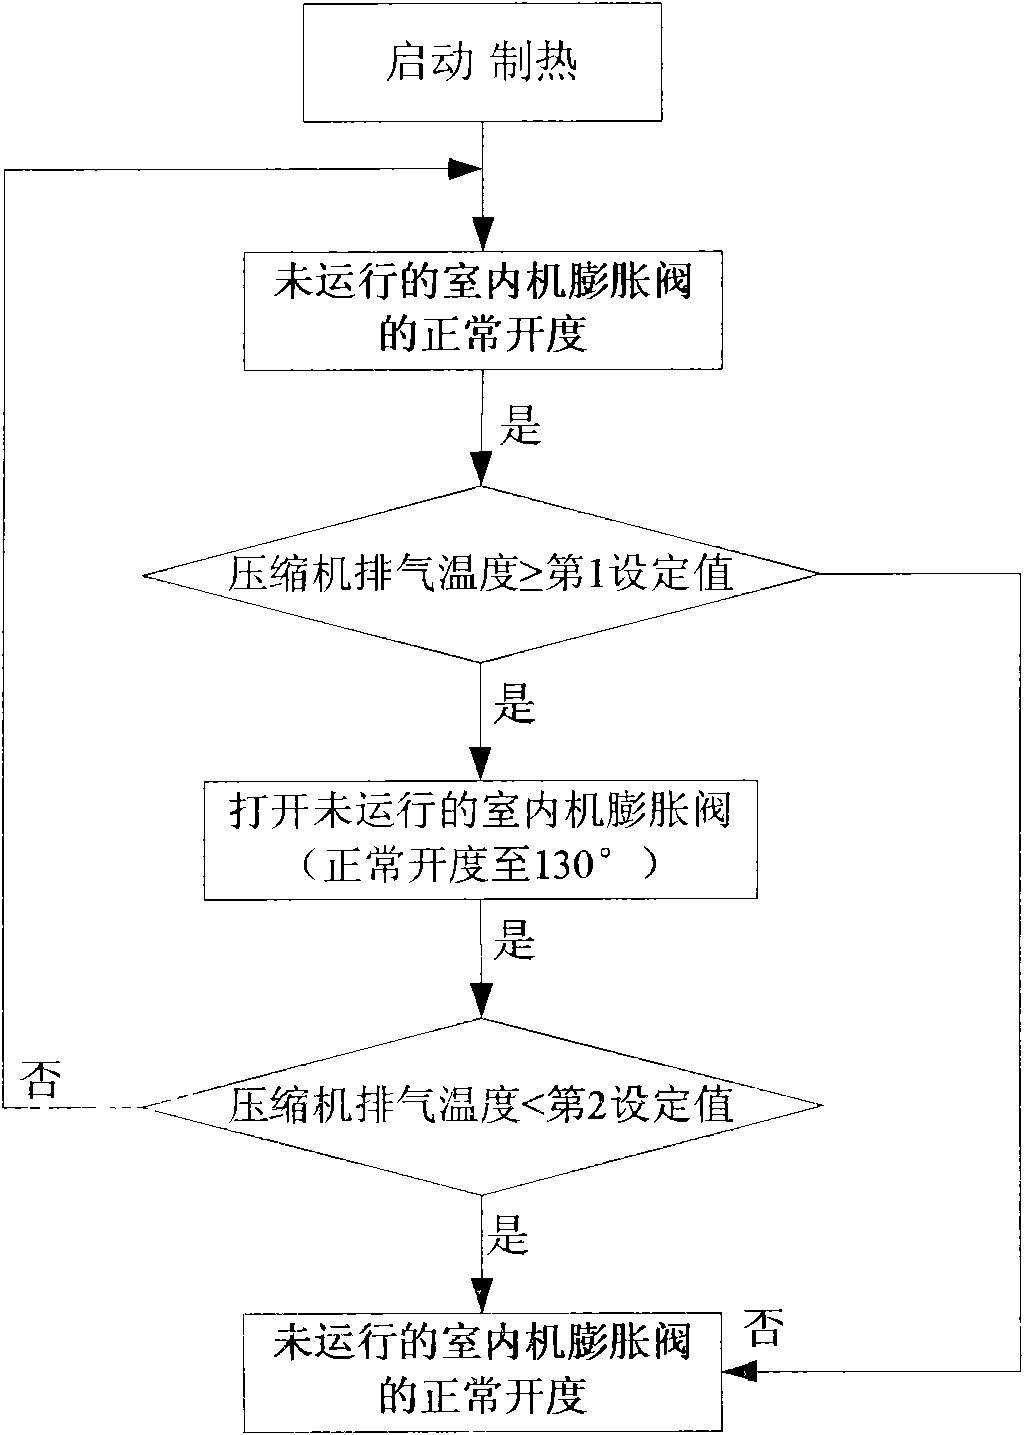 Method for controlling indoor machine during heating of multi-connected central air conditioner